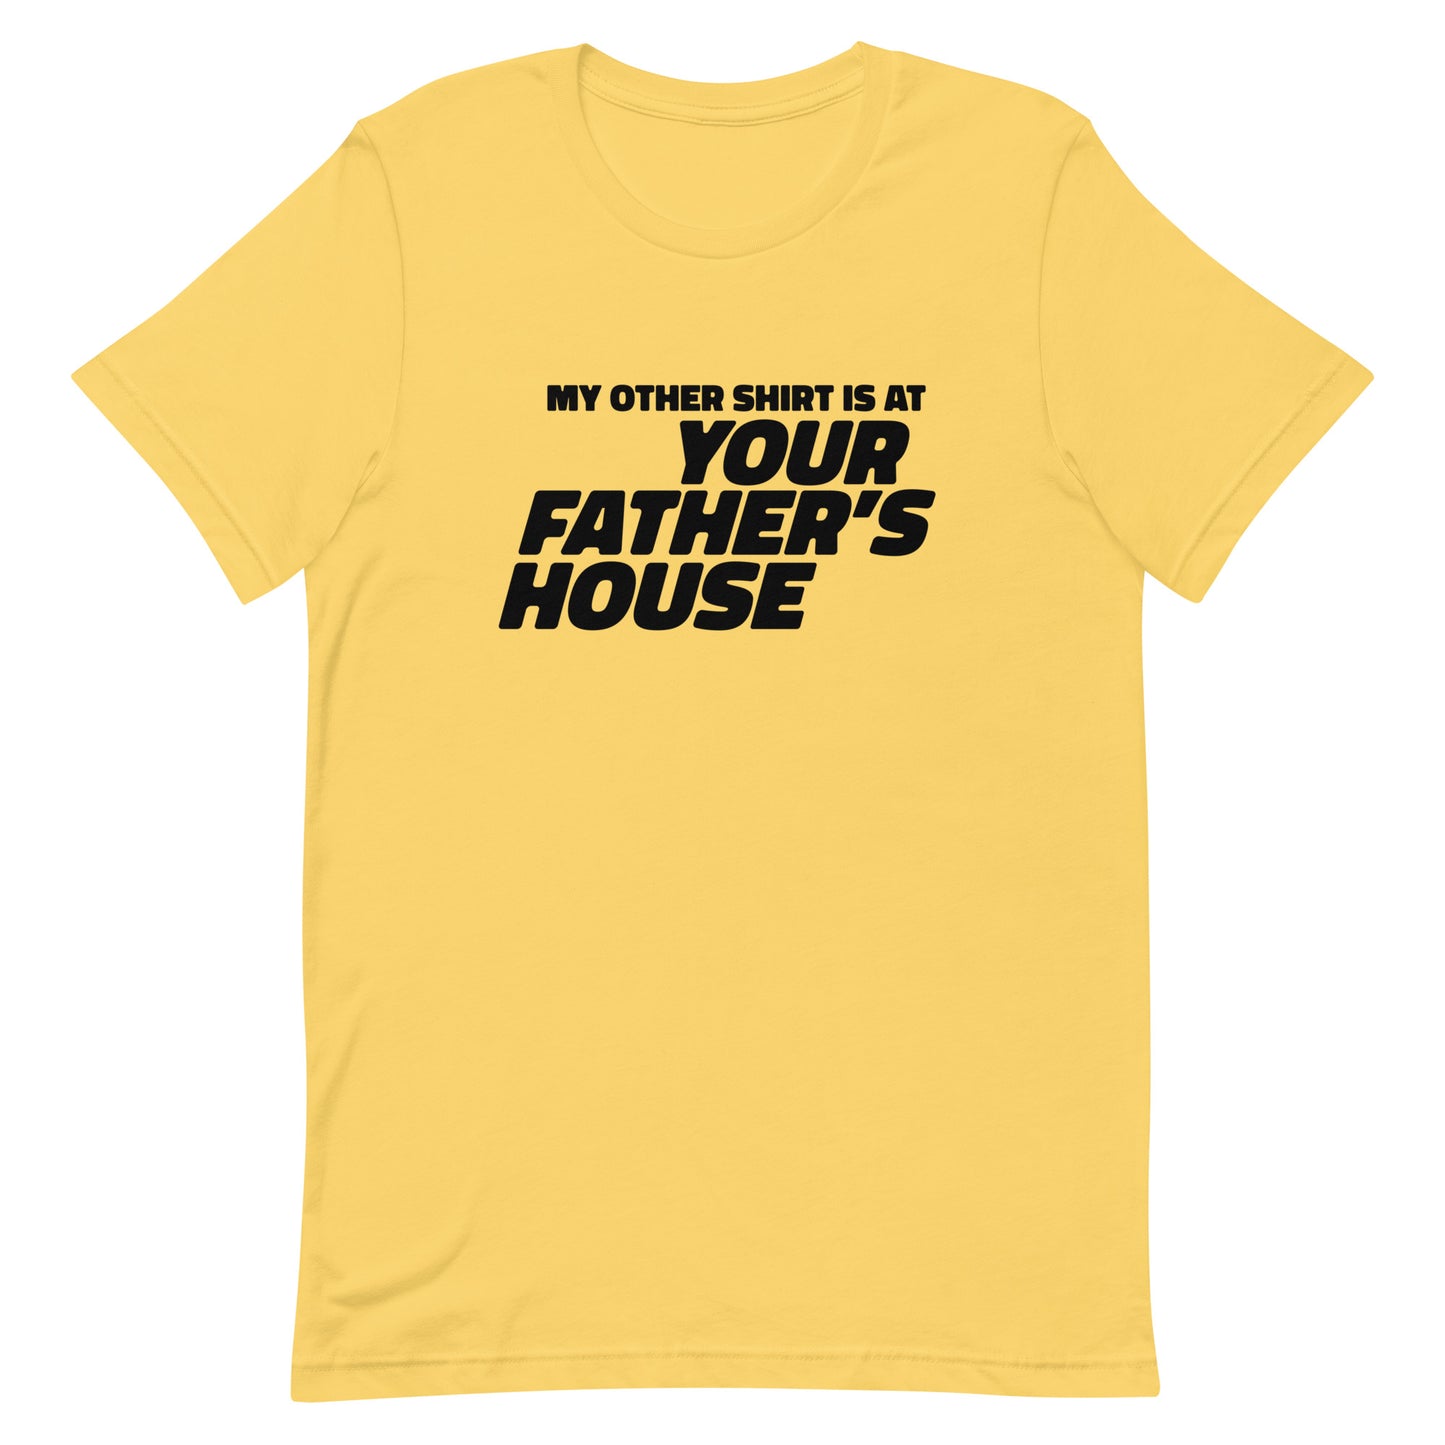 My Other Shirt is at Your Father's House Unisex t-shirt